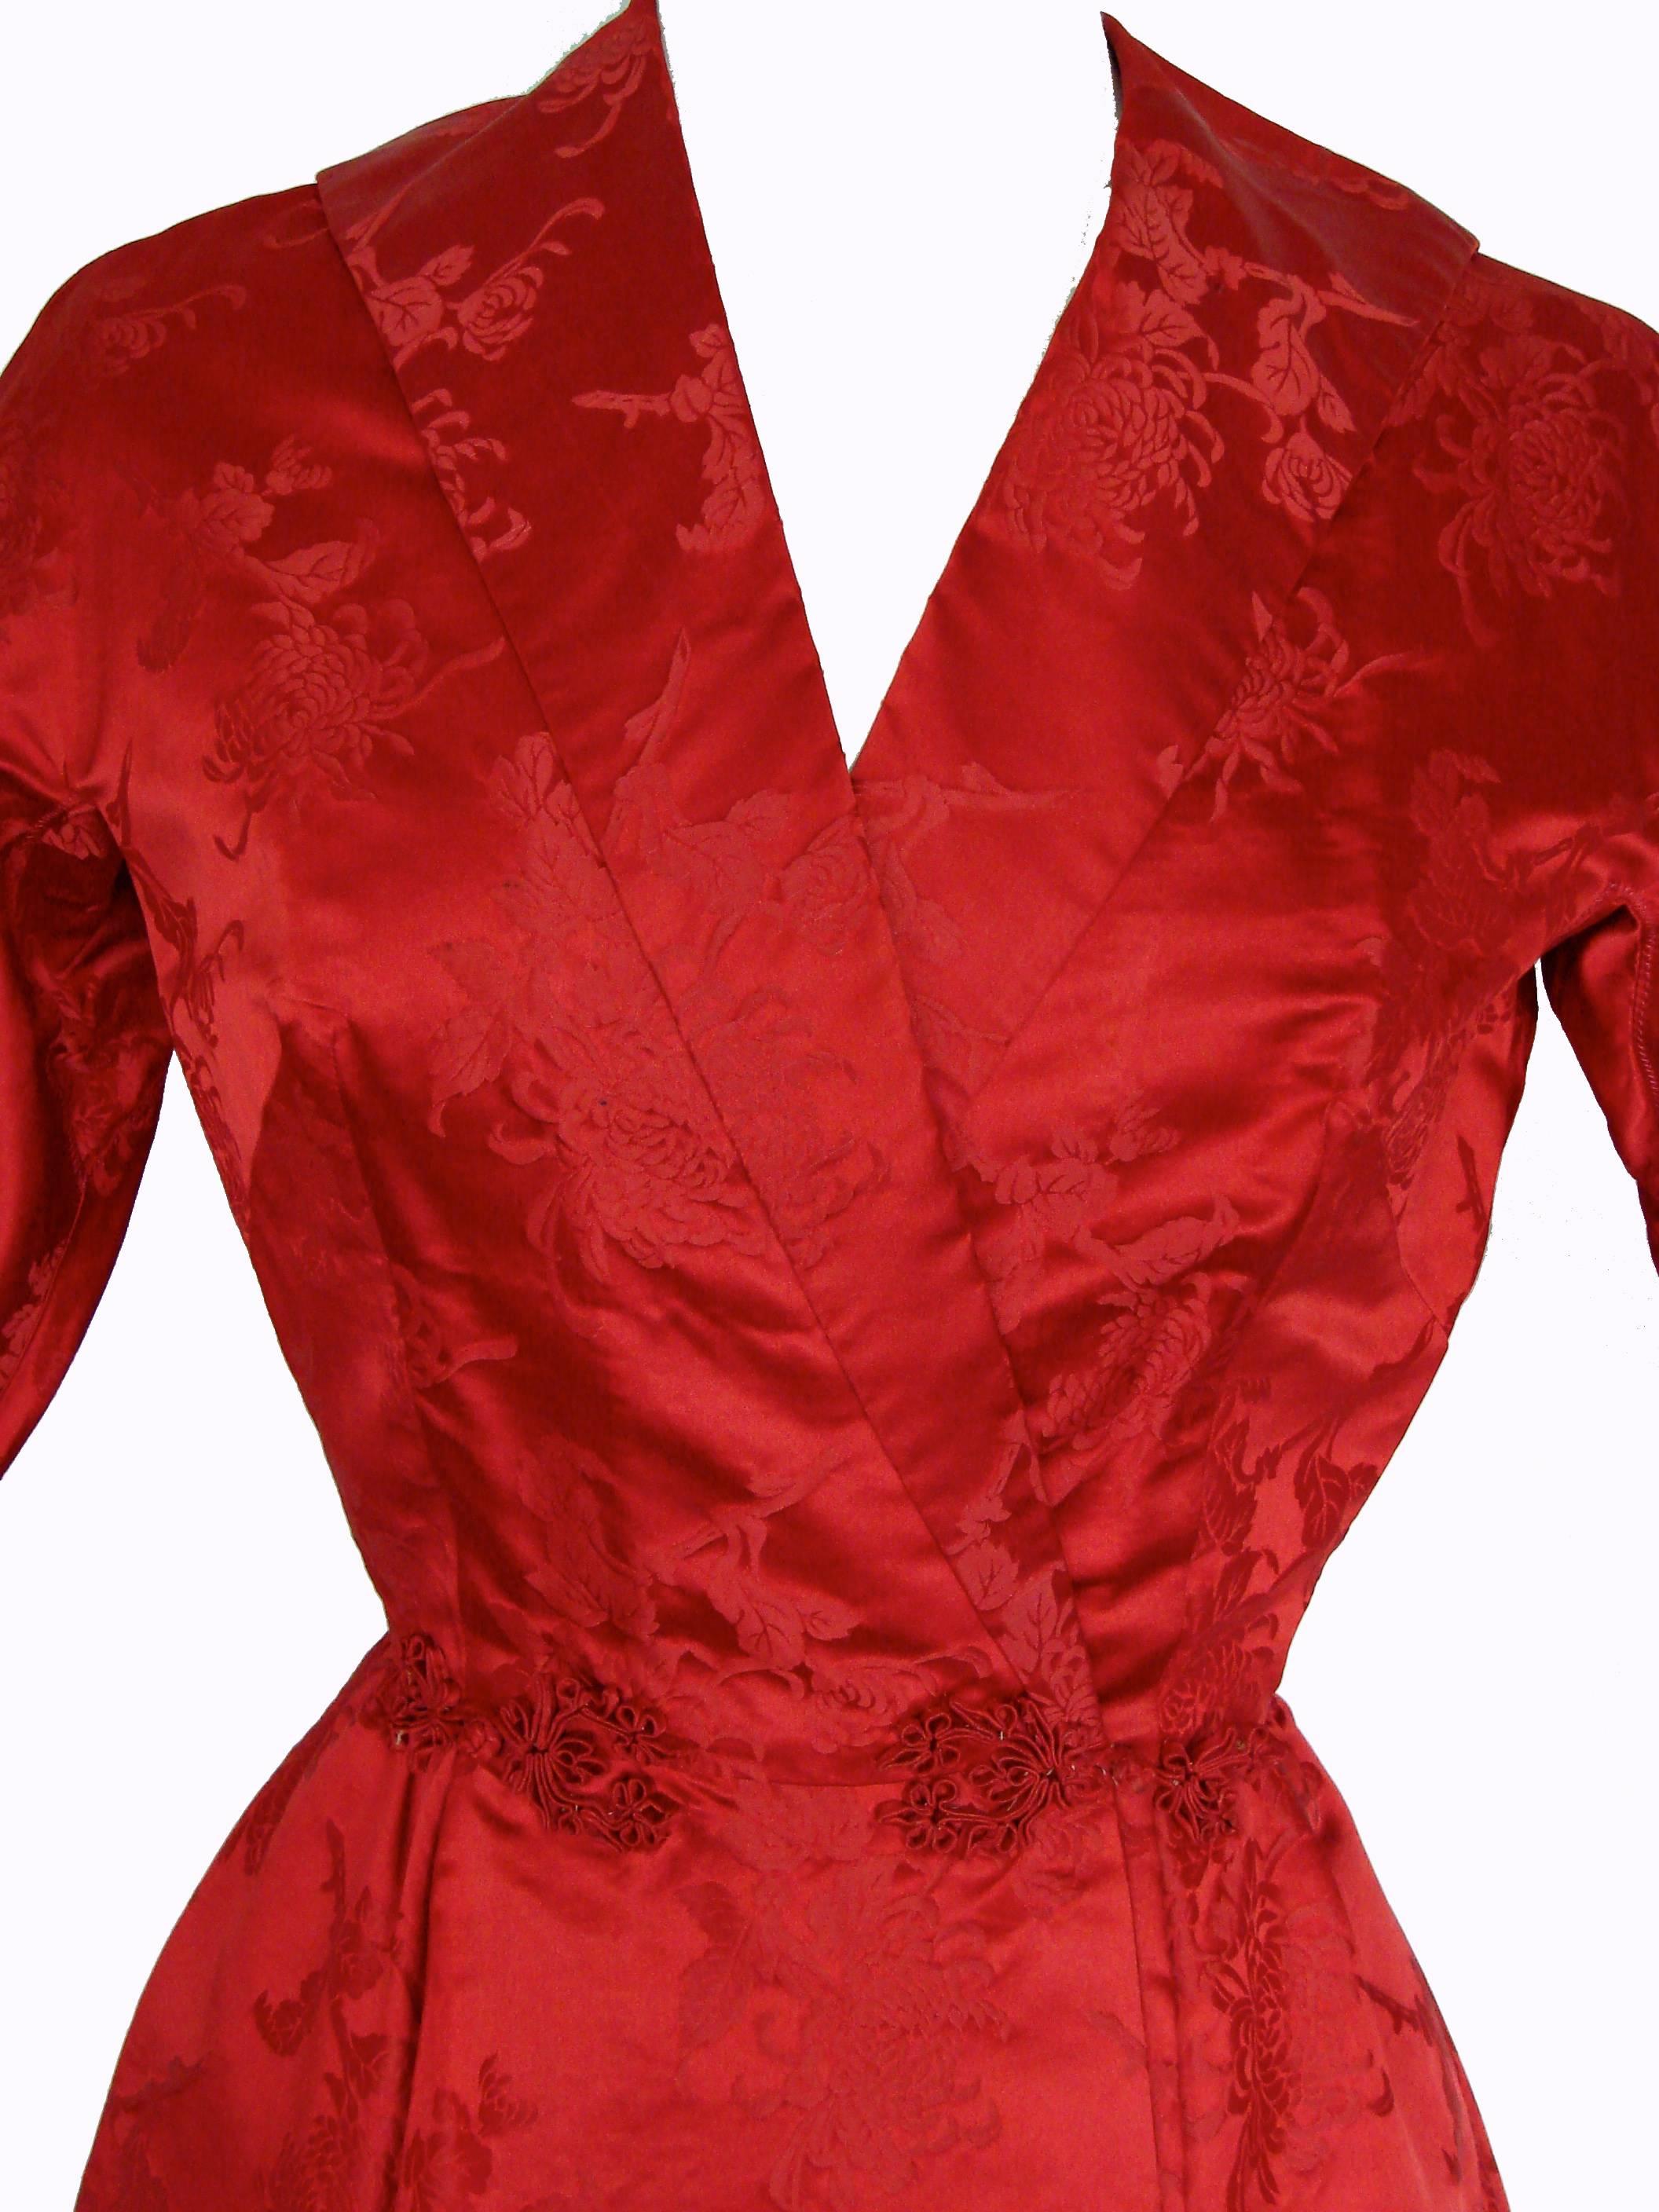 Dynasty for Lord & Taylor Vivid Red Silk Dress with Flared Skirt 1960s Size M 1